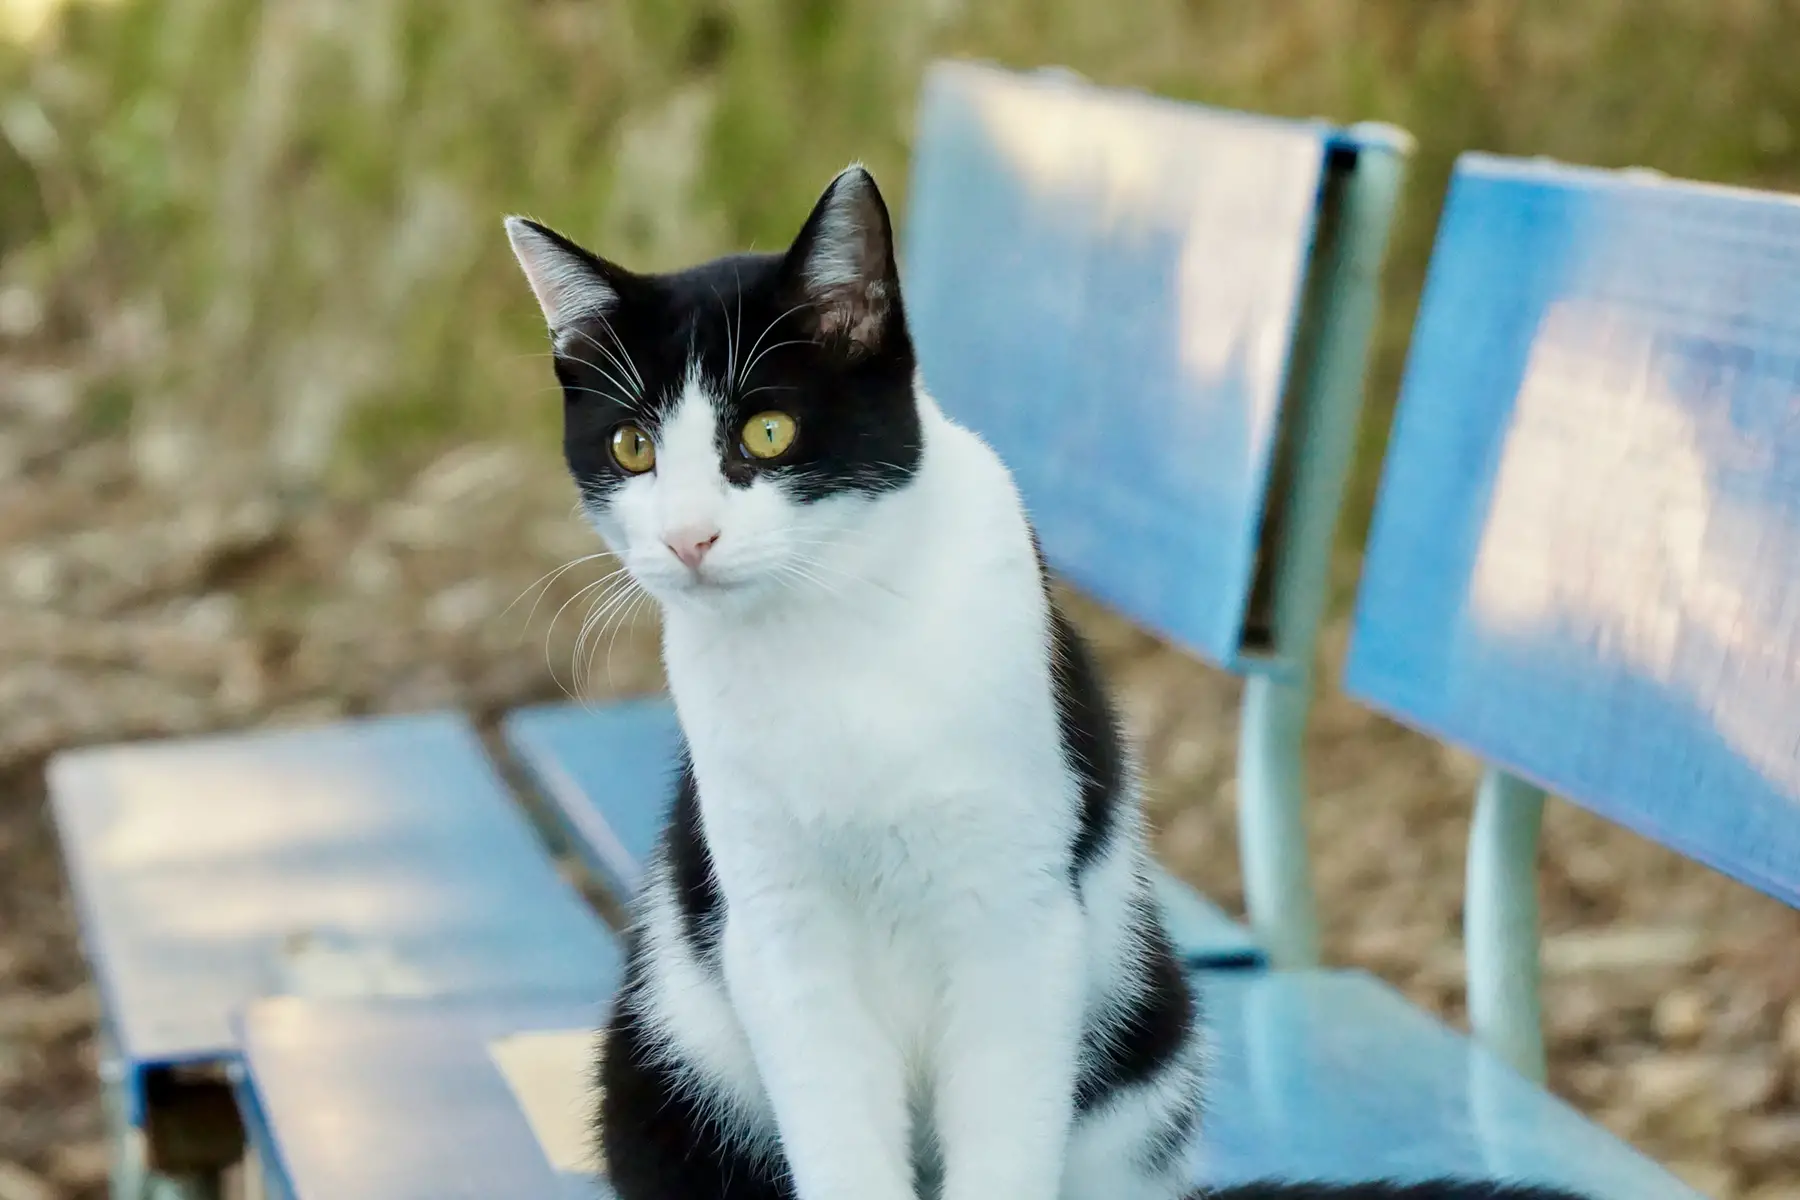 A black-and-white cat sitting on a bench